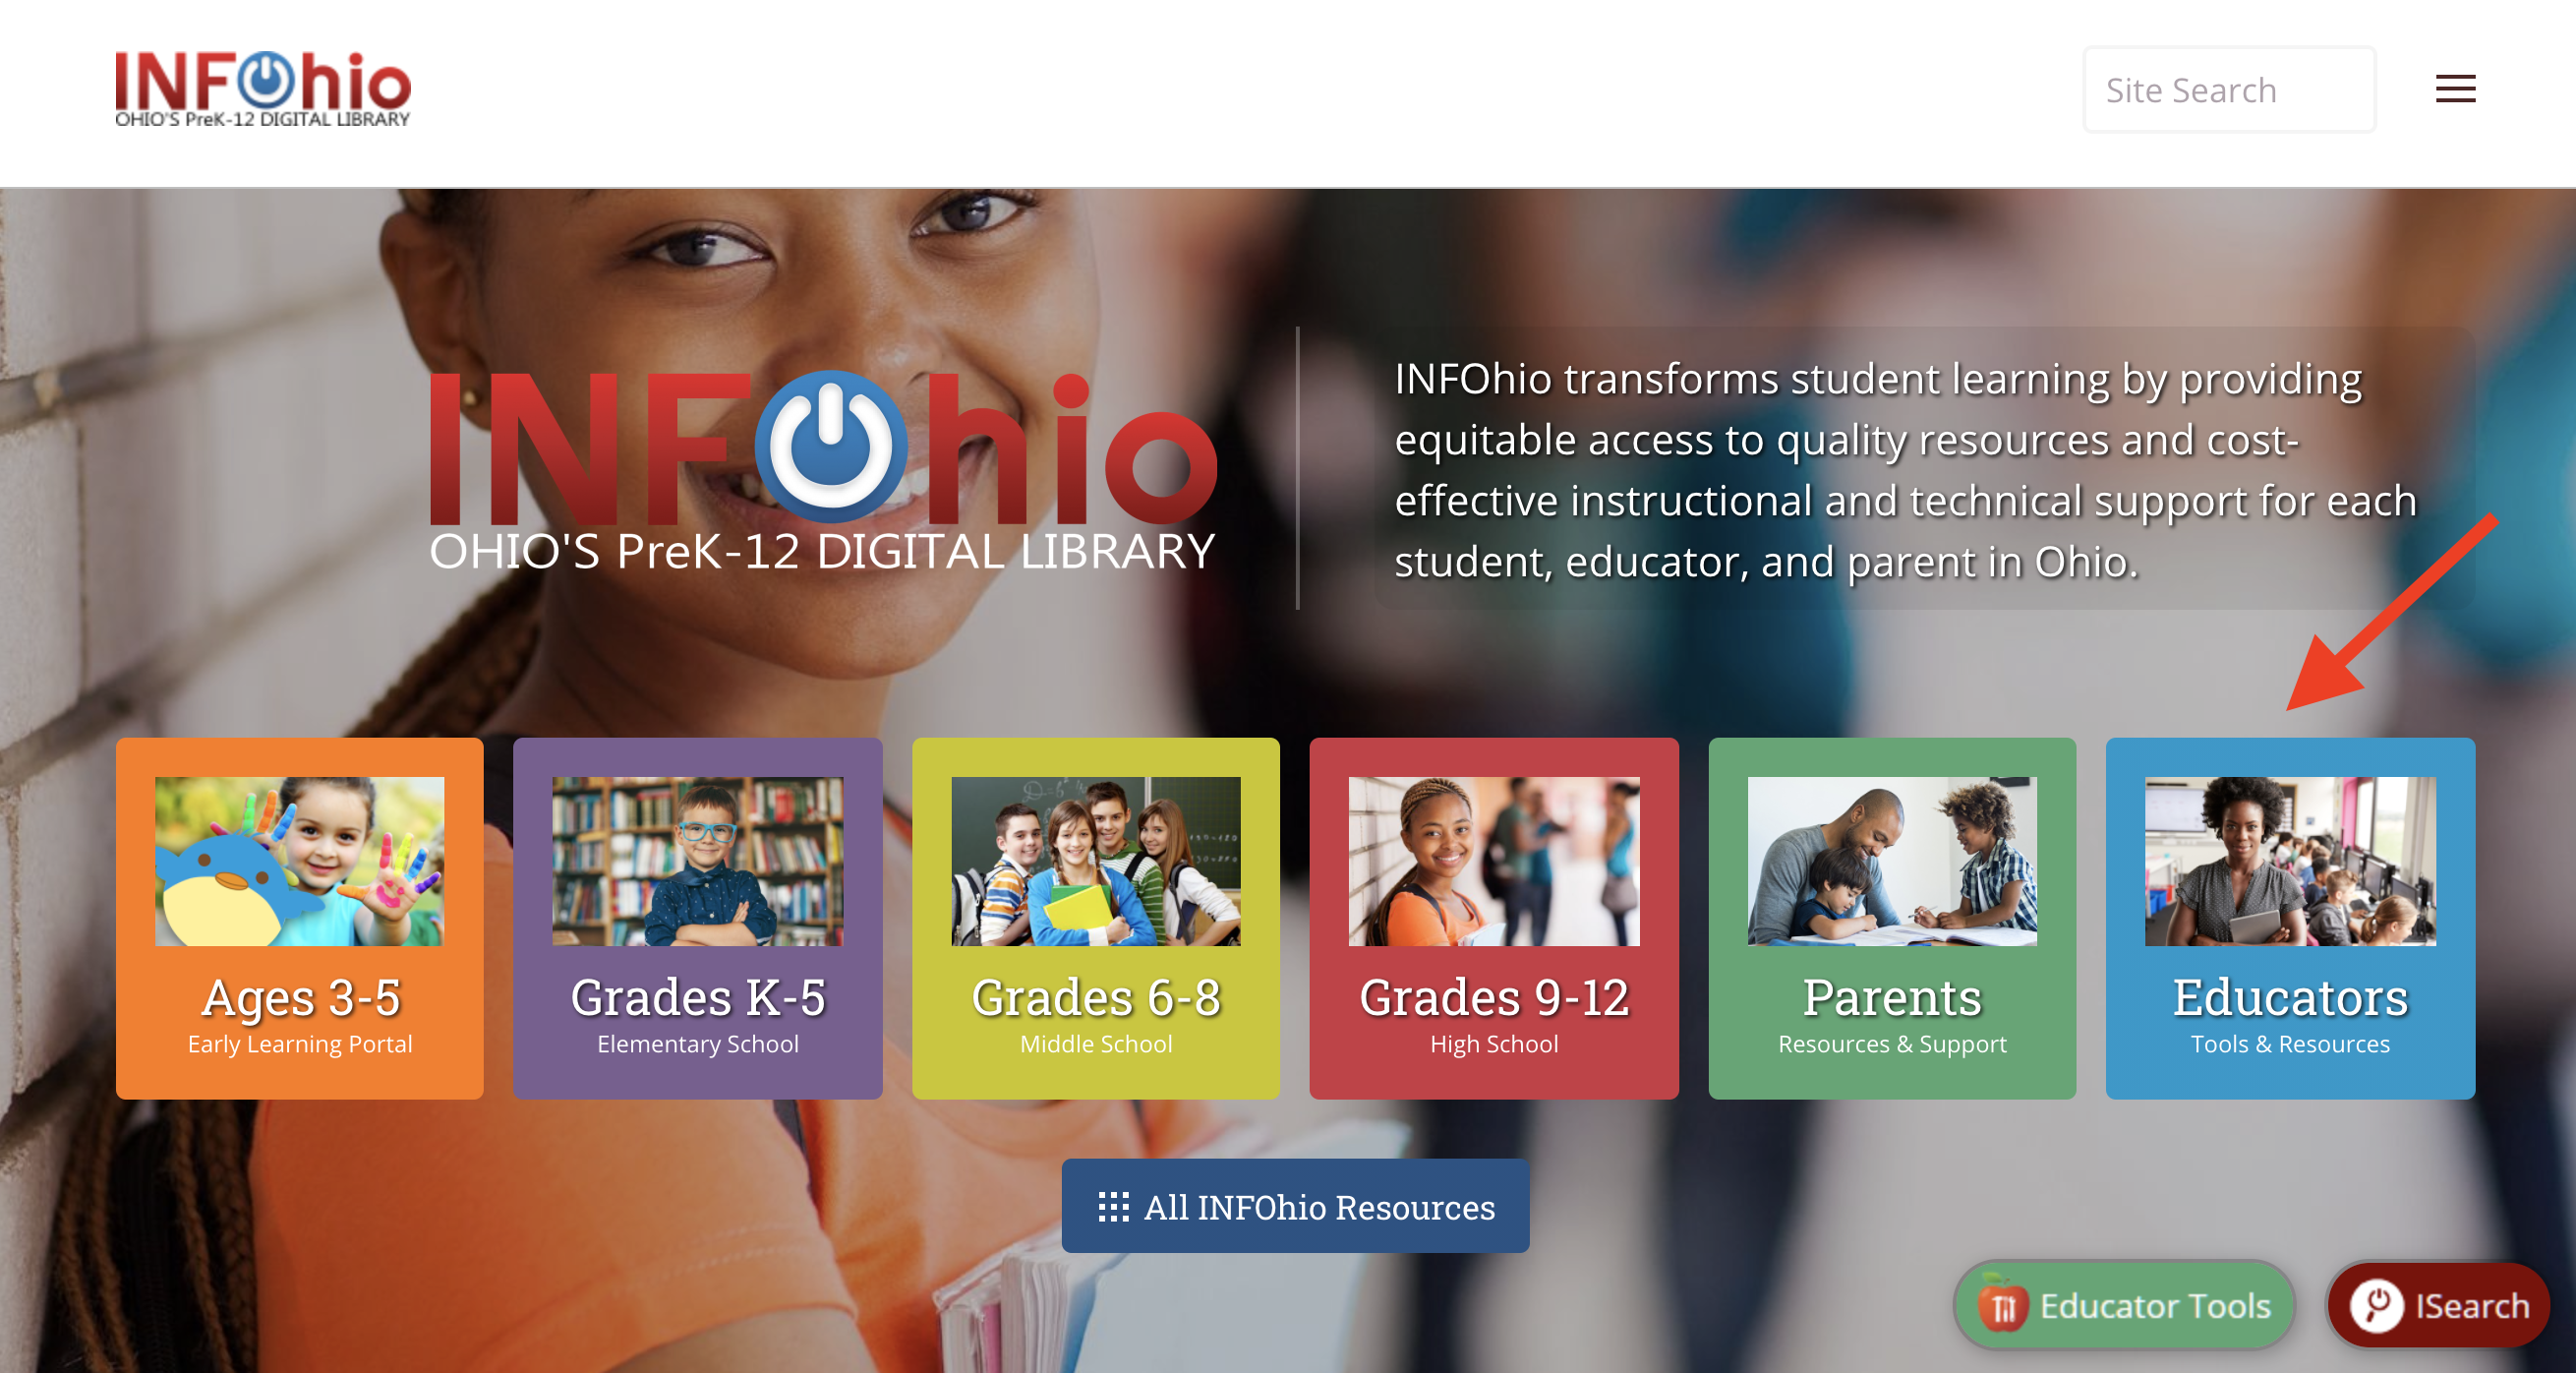 Educators Button Now Added to the INFOhio Homepage